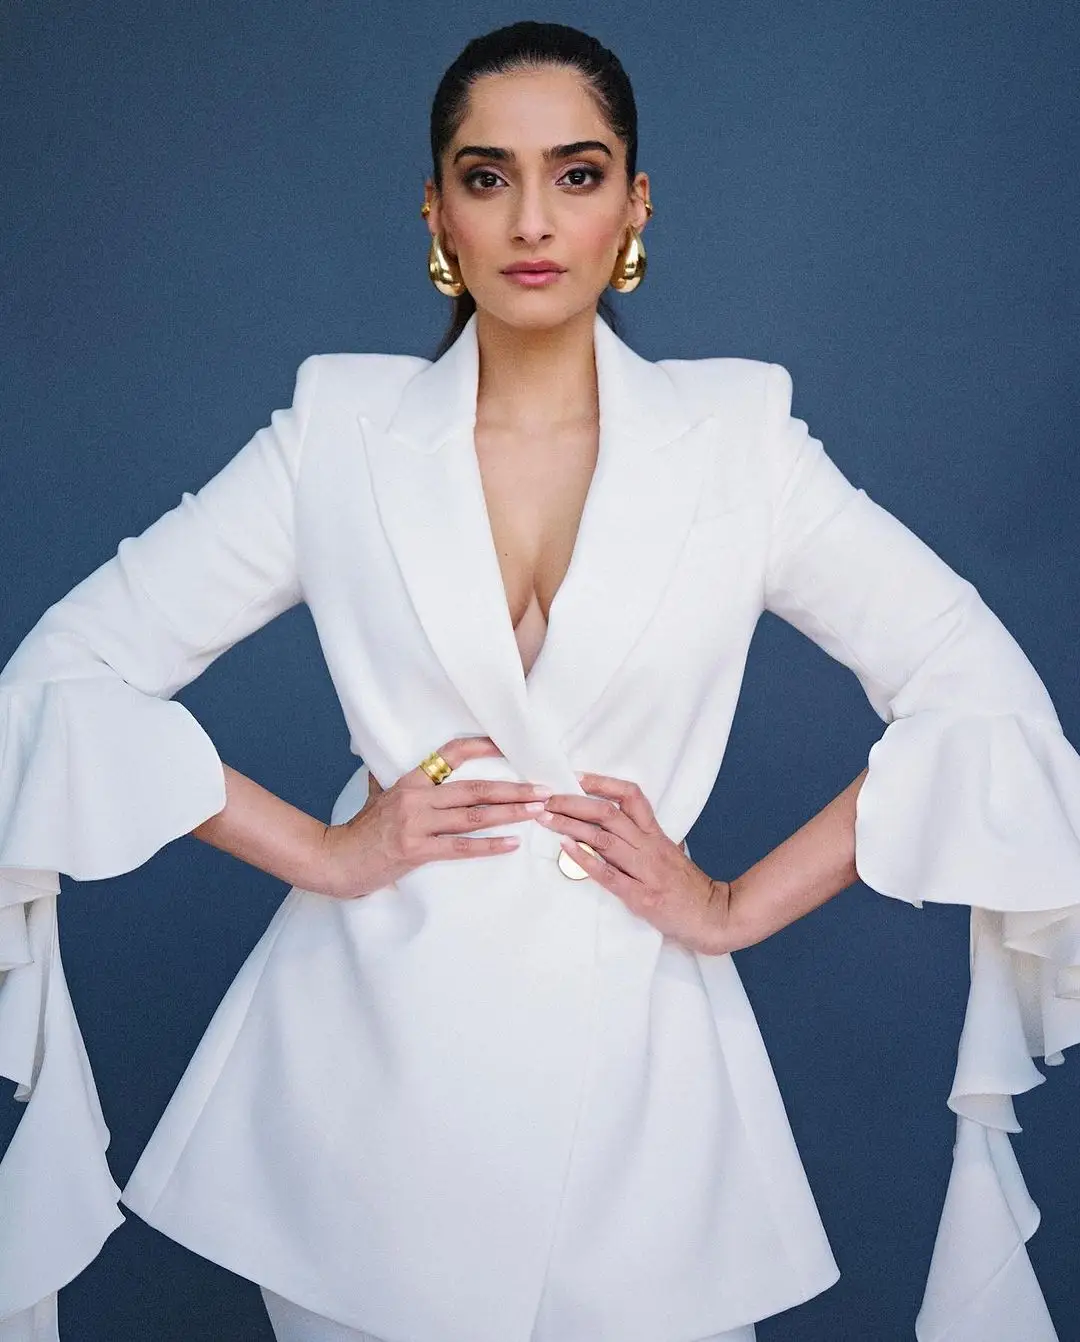 BOLLYWOOD ACTRESS SONAM KAPOOR PHOTOSHOOT IN LONG WHITE TOP PANT 2